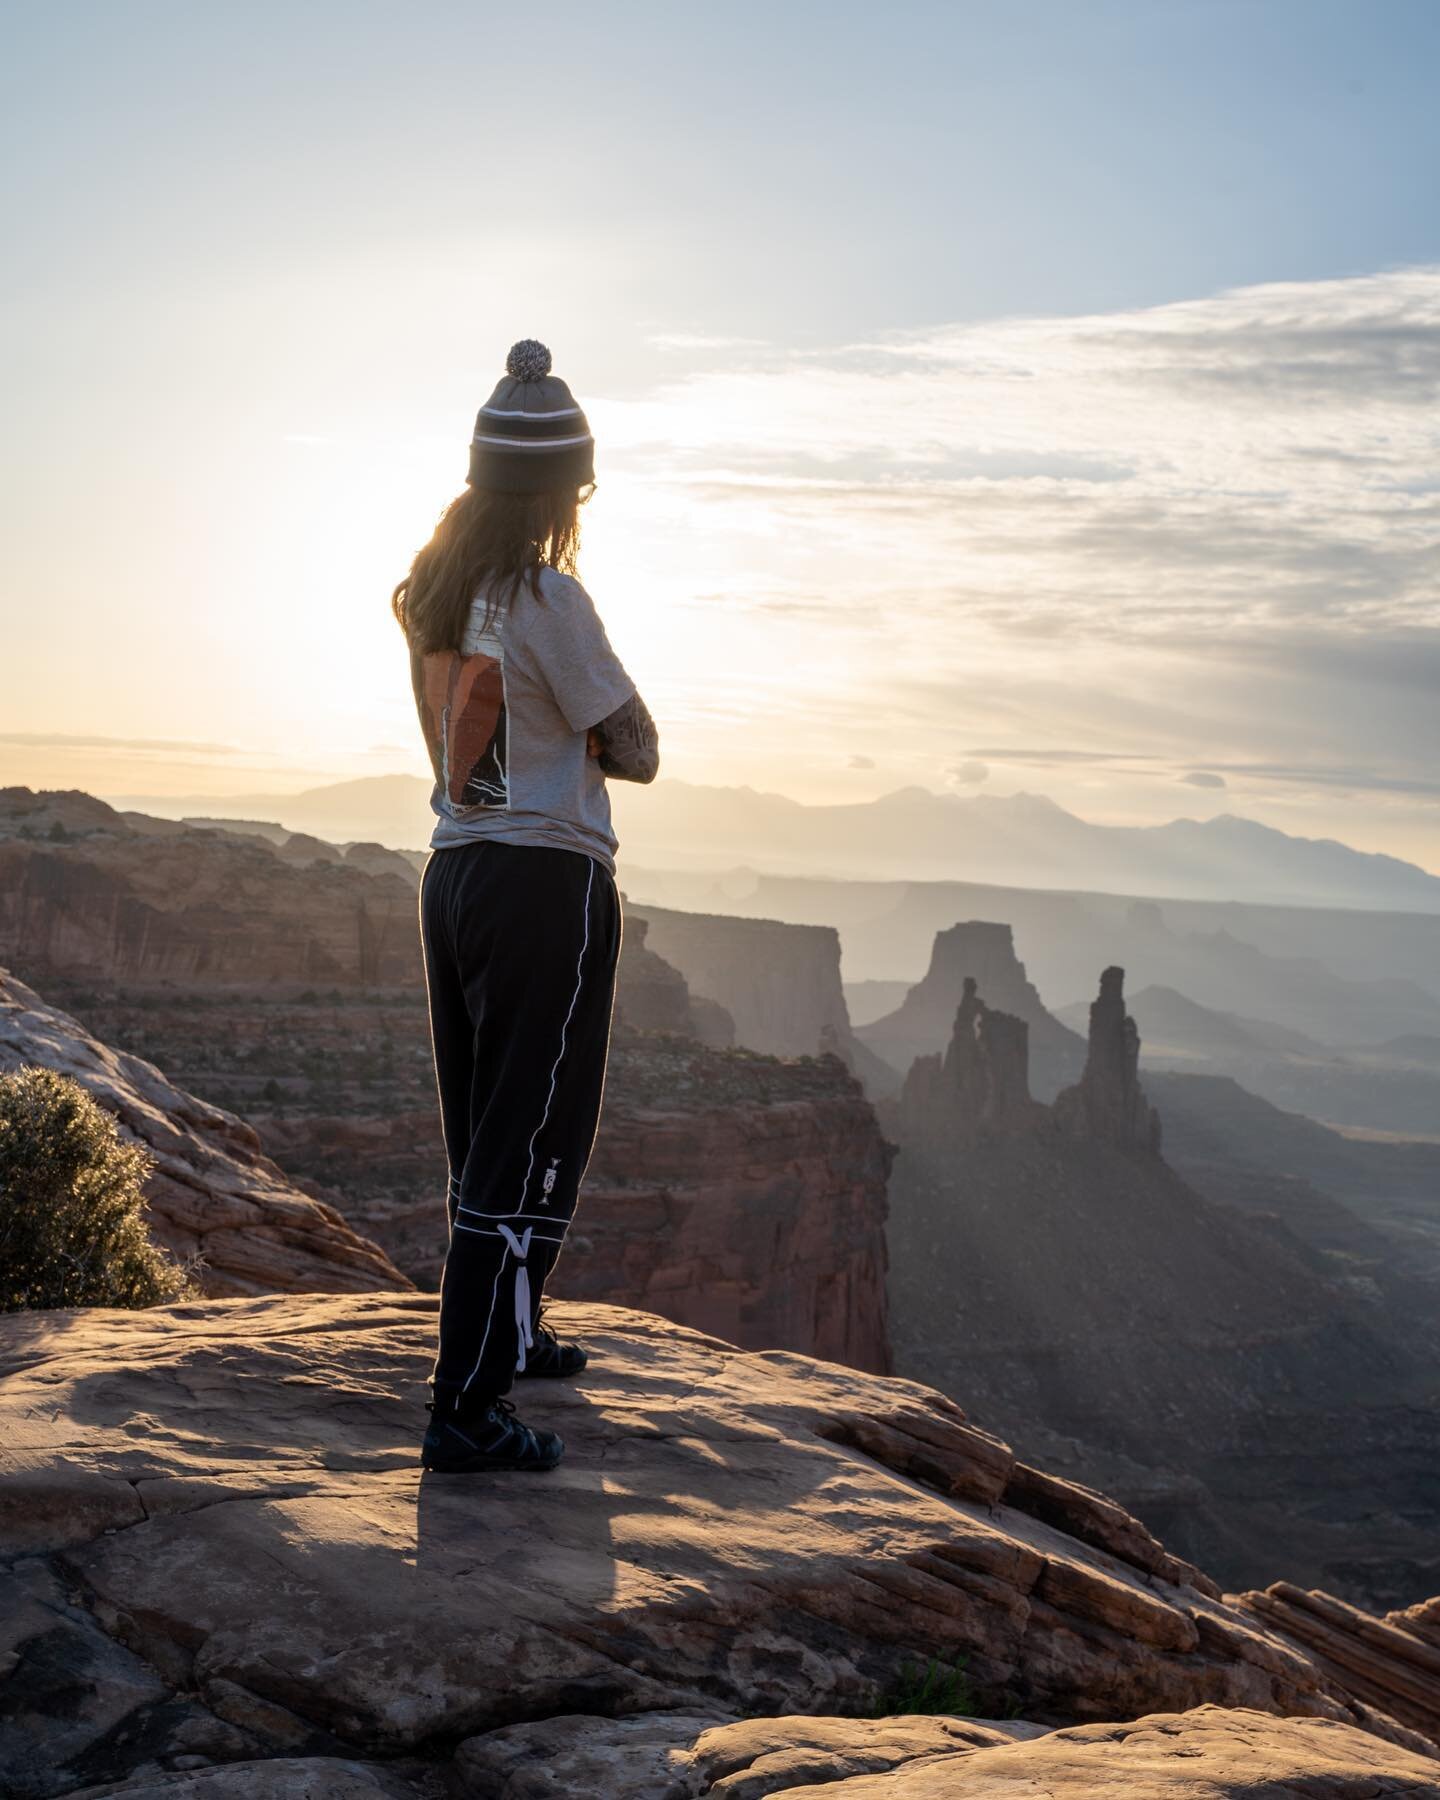 Travel portraits are a great way to honor a memorable trip! This was one of the most glorious sunrises ever with @lina.cecilia 🏜️

#travelportraits #portraitphotography #sunriseview #canyonlands #goldenhourlight